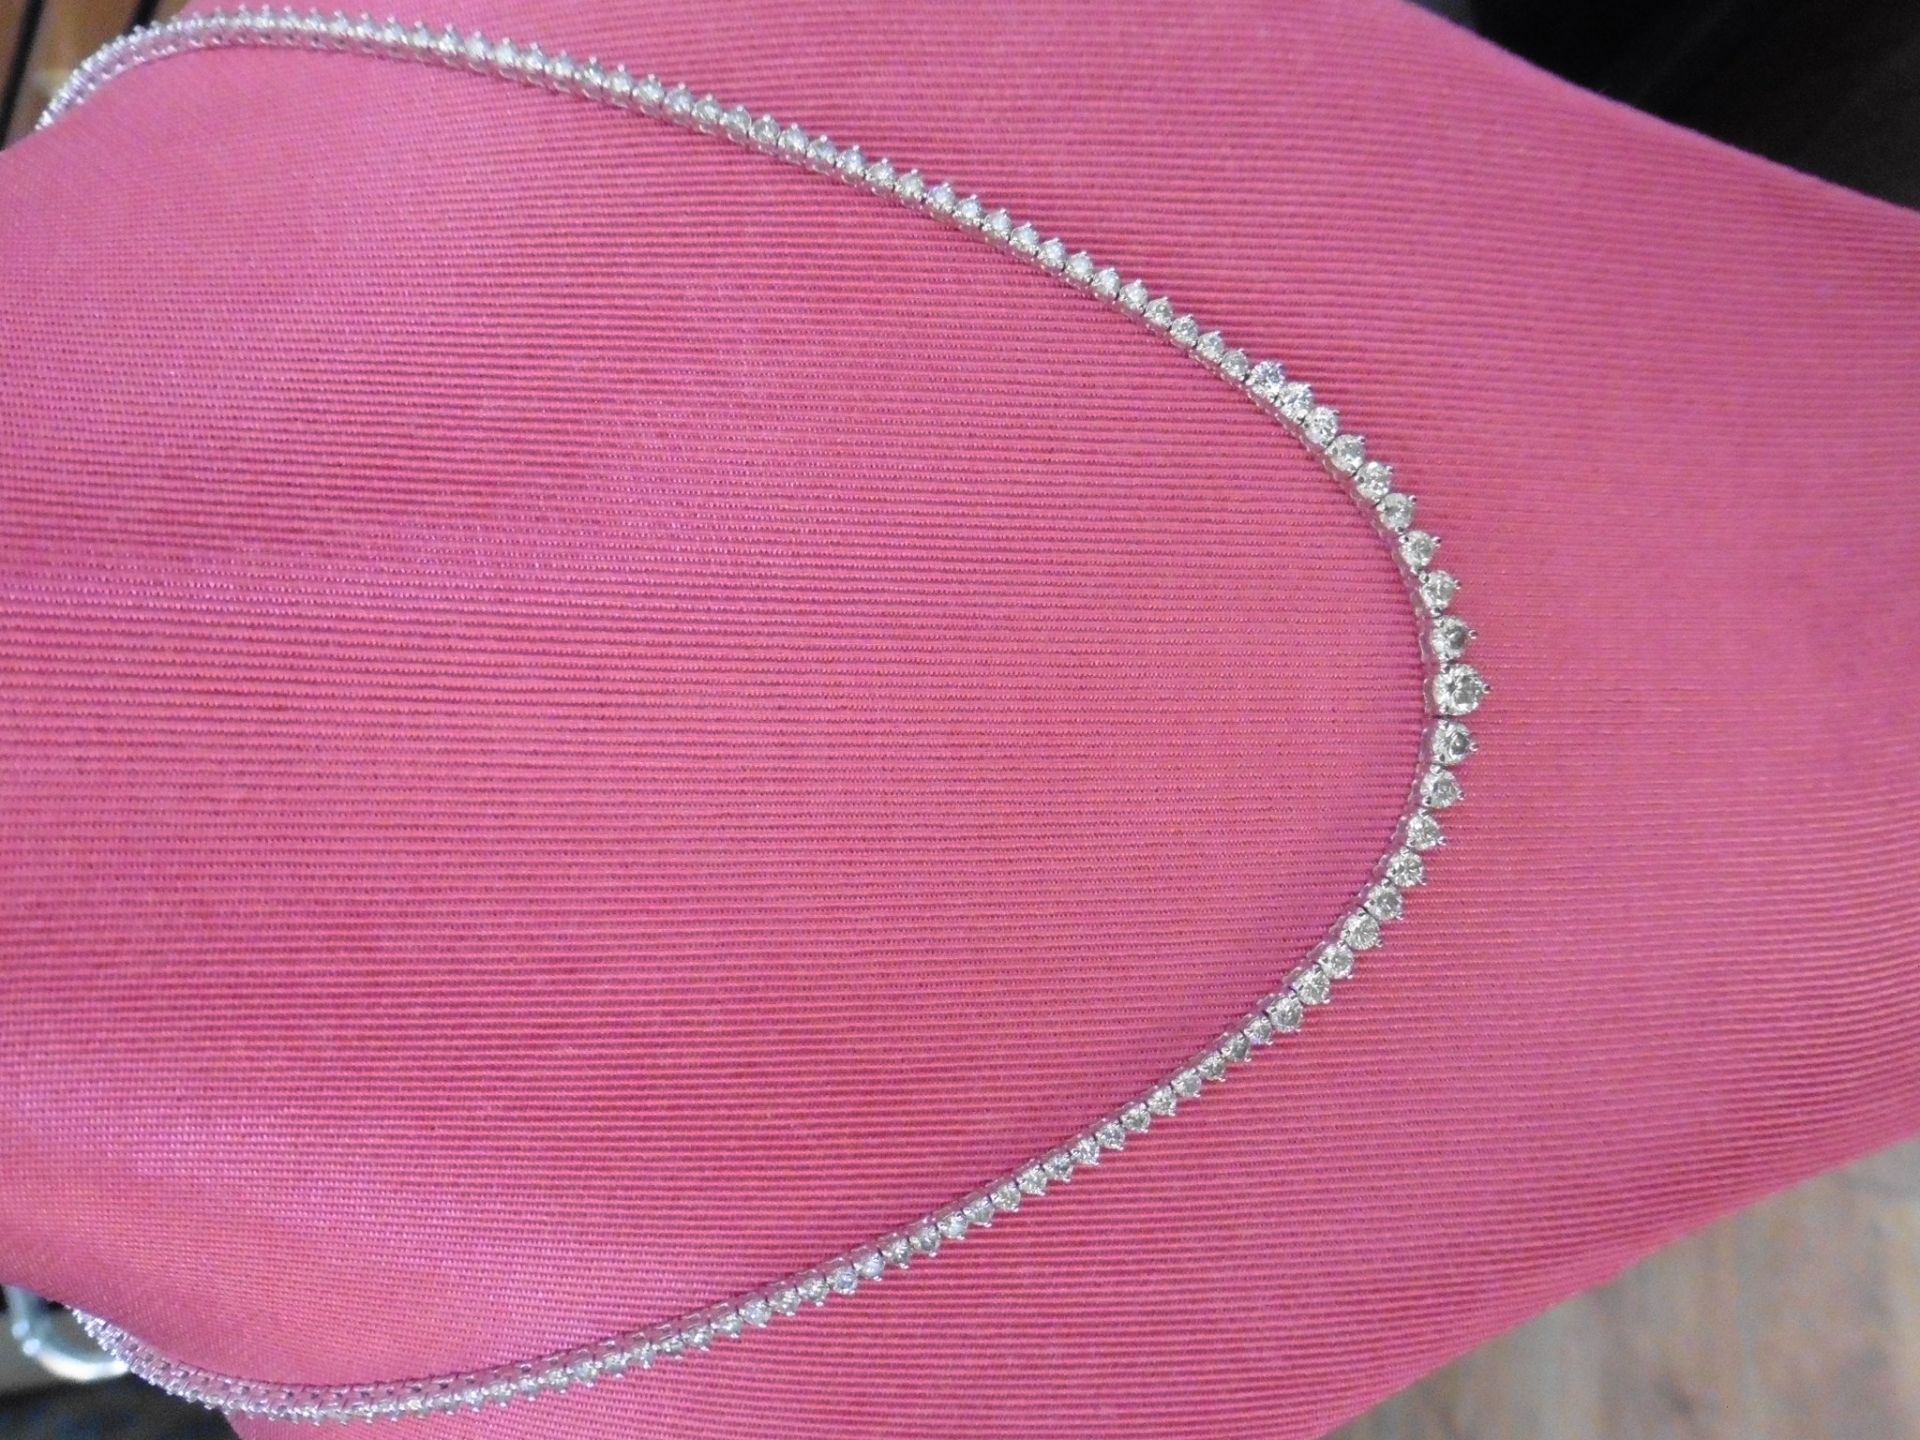 11.75ct Diamond tennis style necklace. 3 claw setting. Graduated diamonds, I colour, Si2 clarity - Image 3 of 3